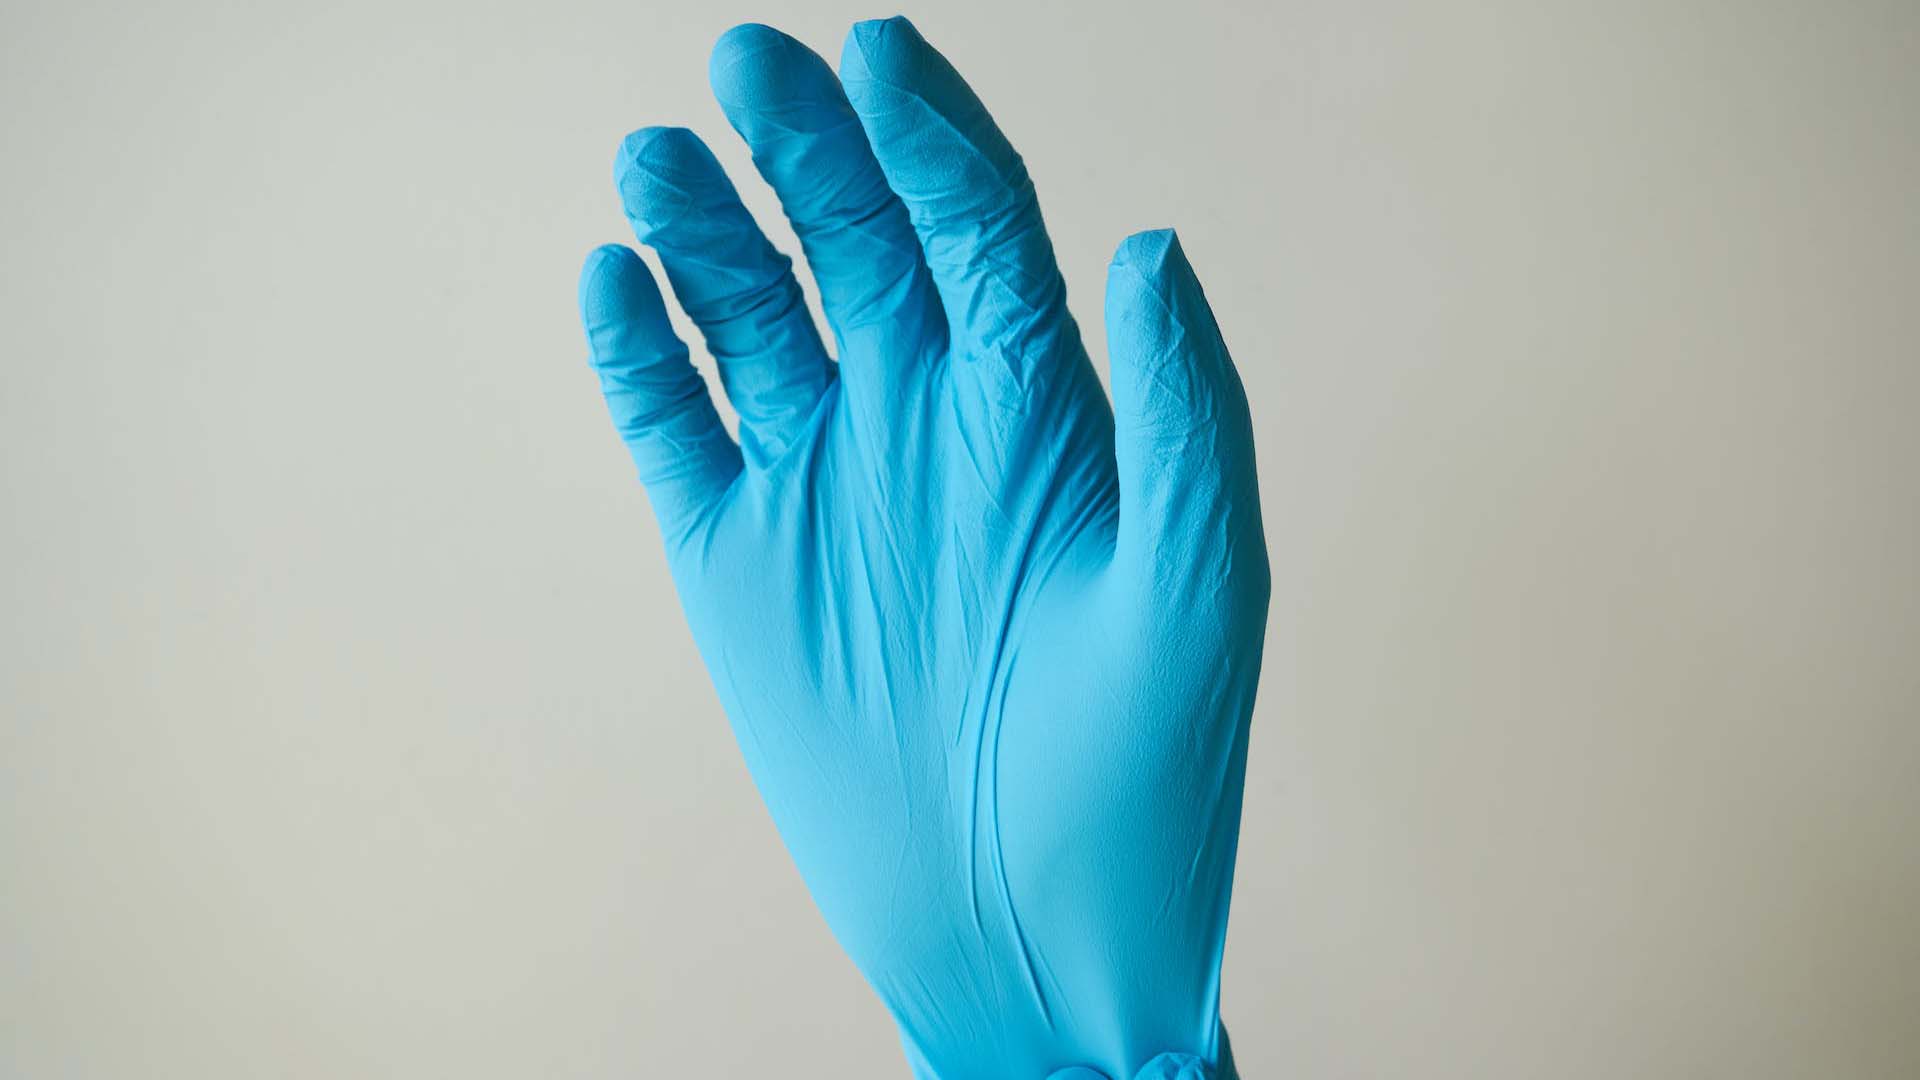 right hand of a person donned with blue latex gloves